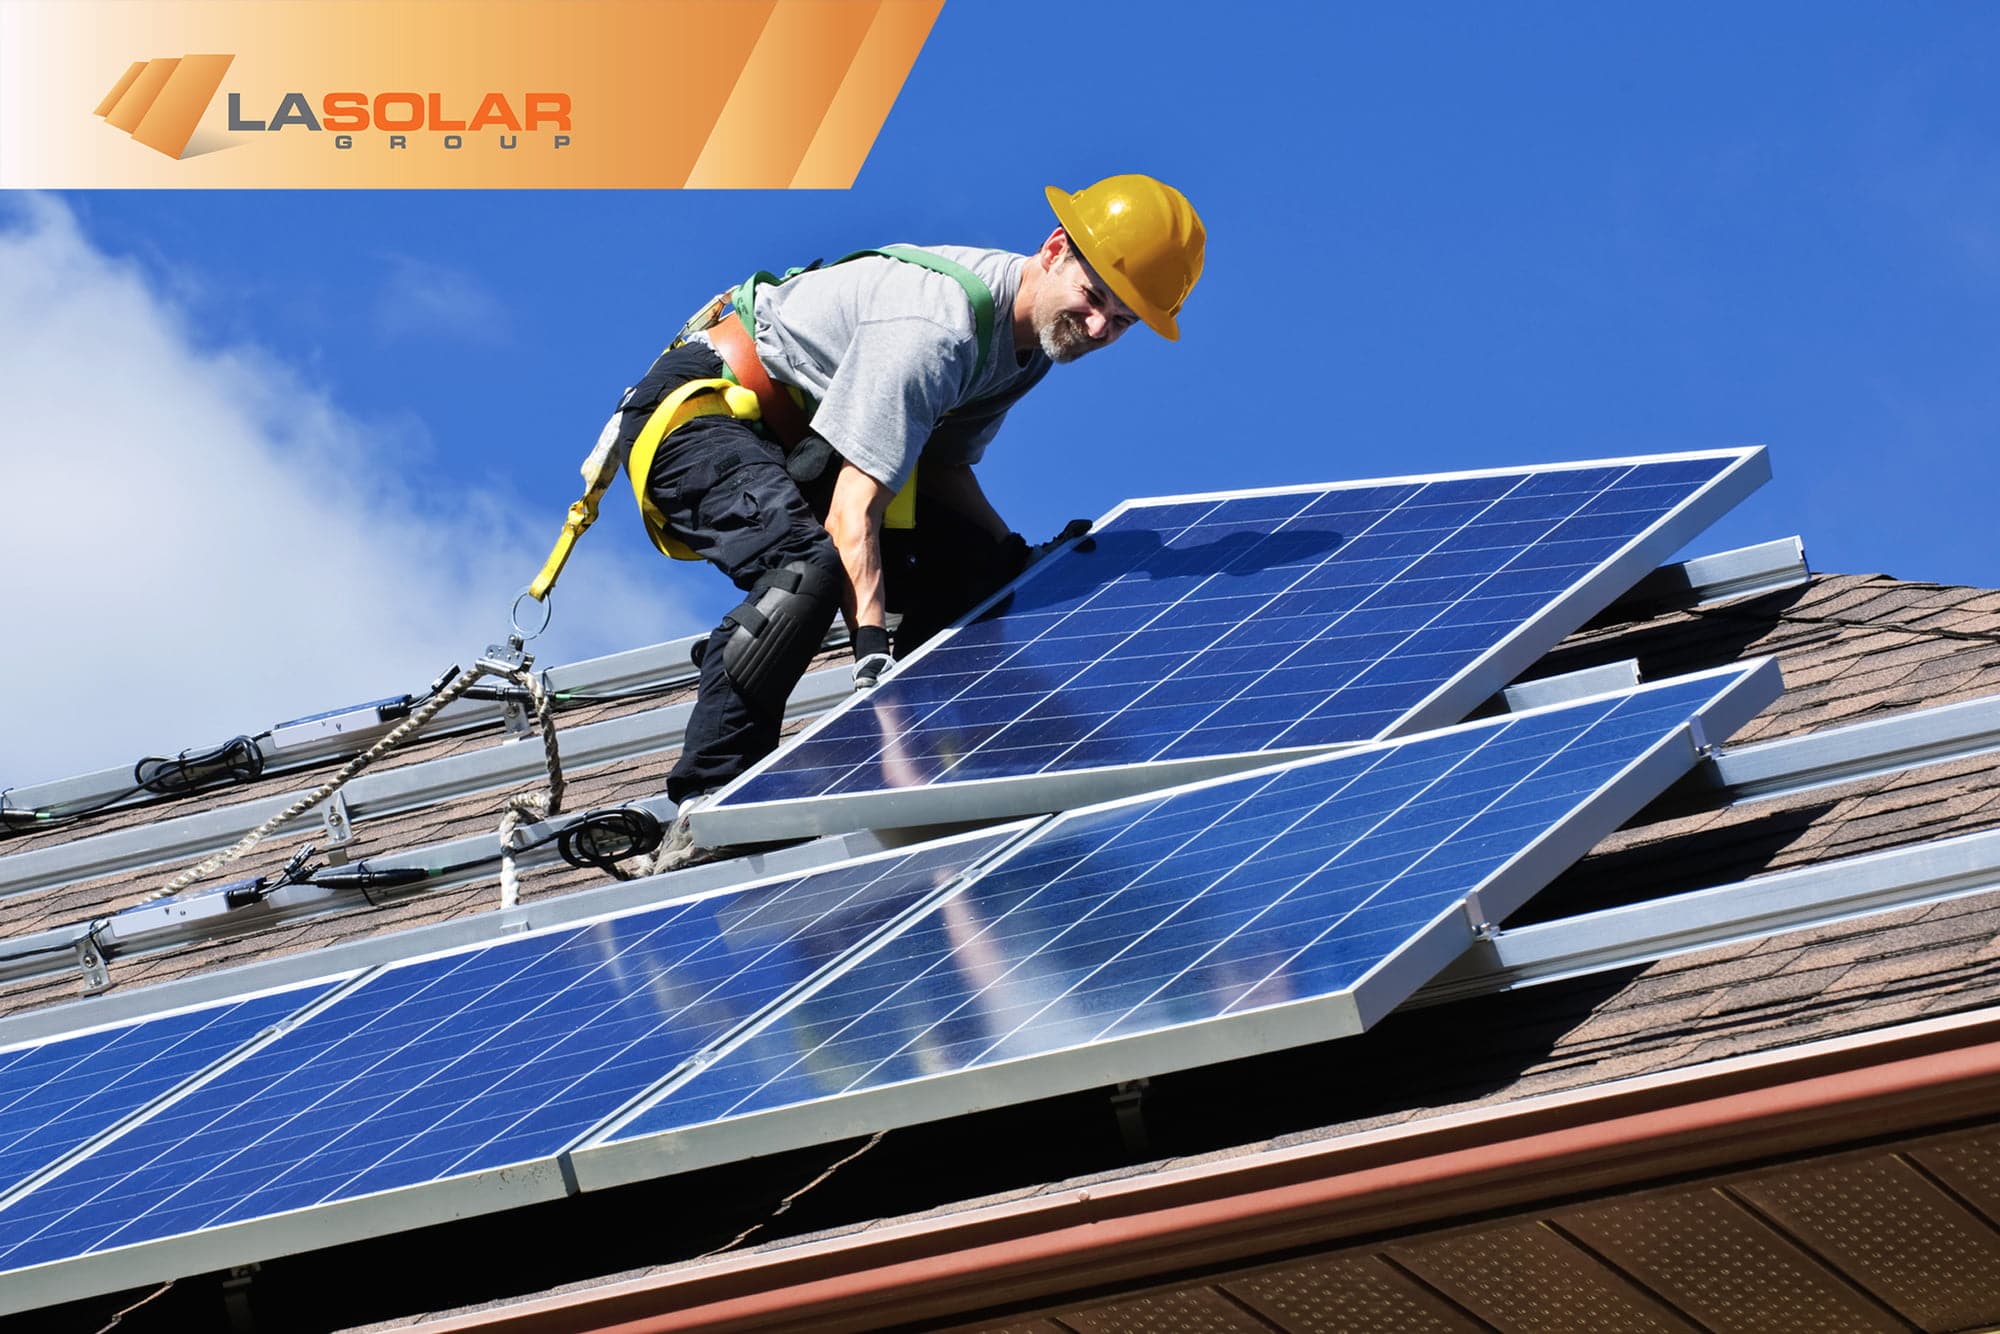 Specialist-Who-Is-Installing-Solar-Panels-On-The-Roof